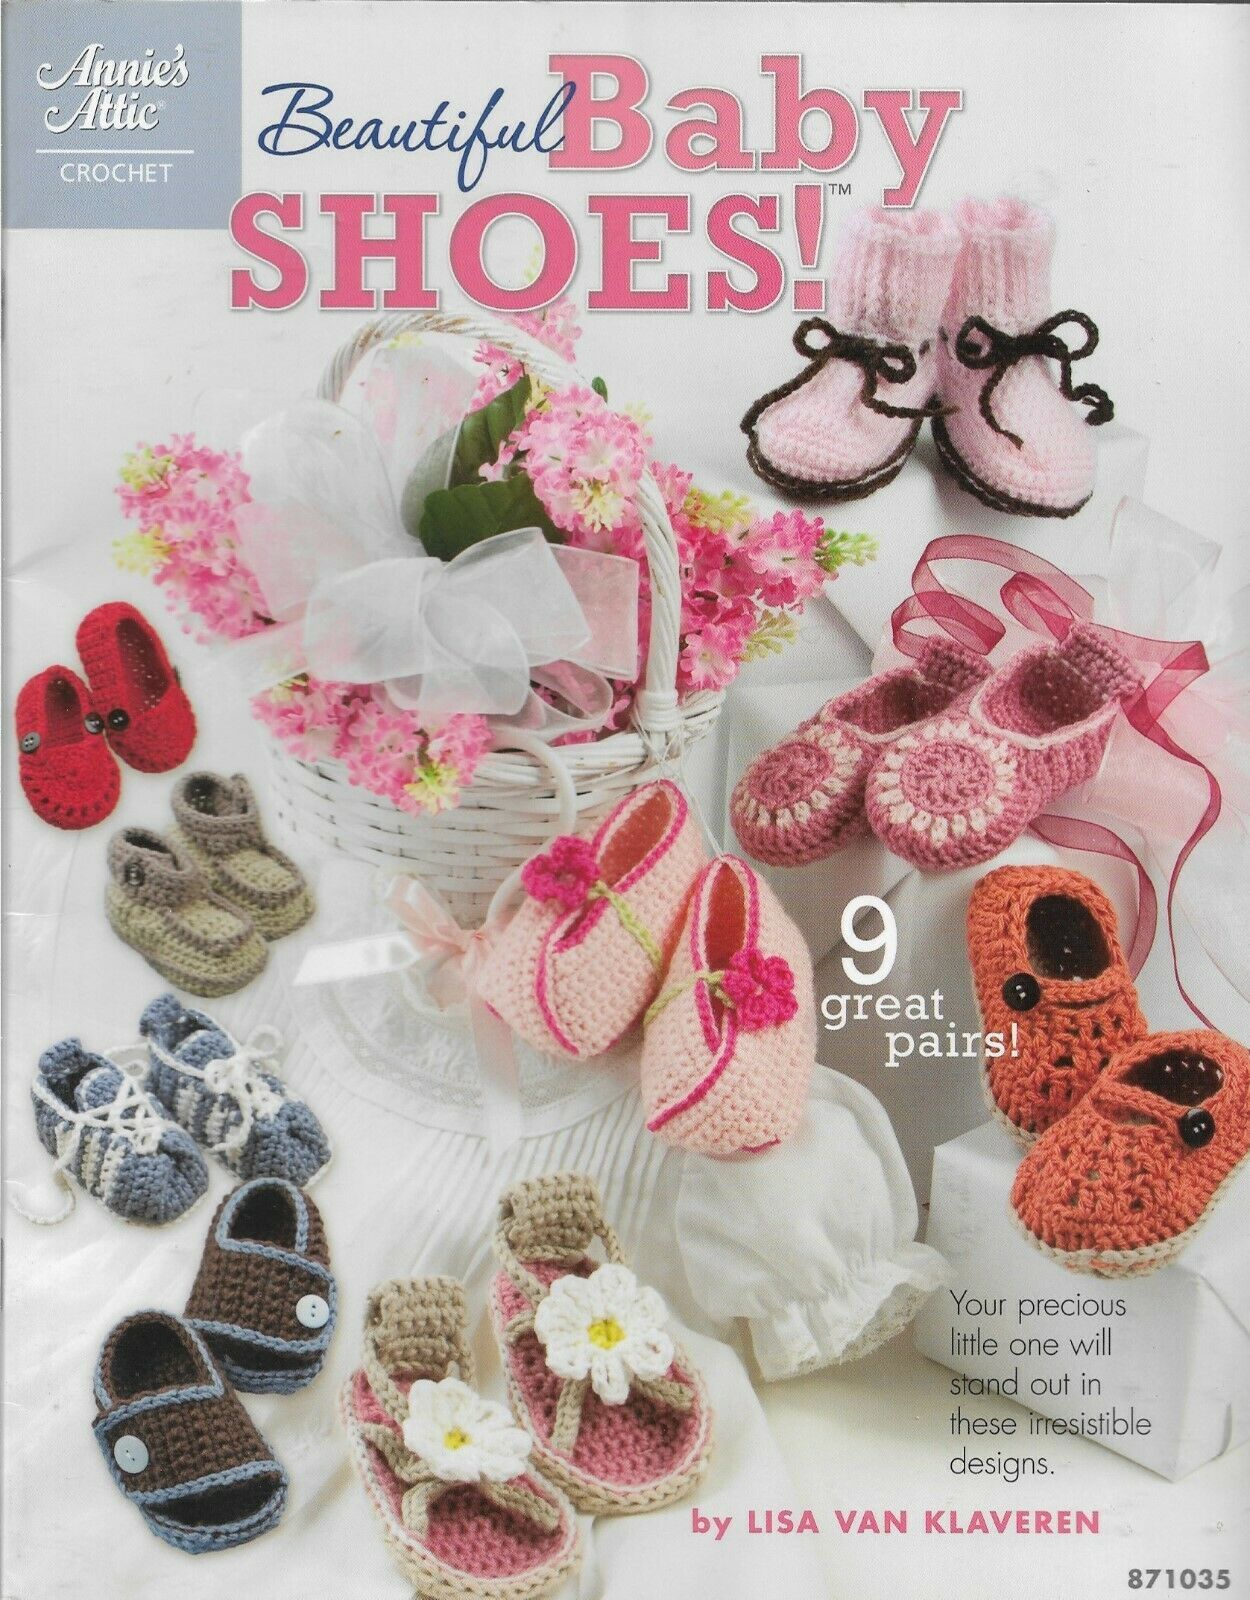 Annie's Attic Crochet Pattern Booklet-Beautiful Baby Shoes-9  Great Pairs - $8.56